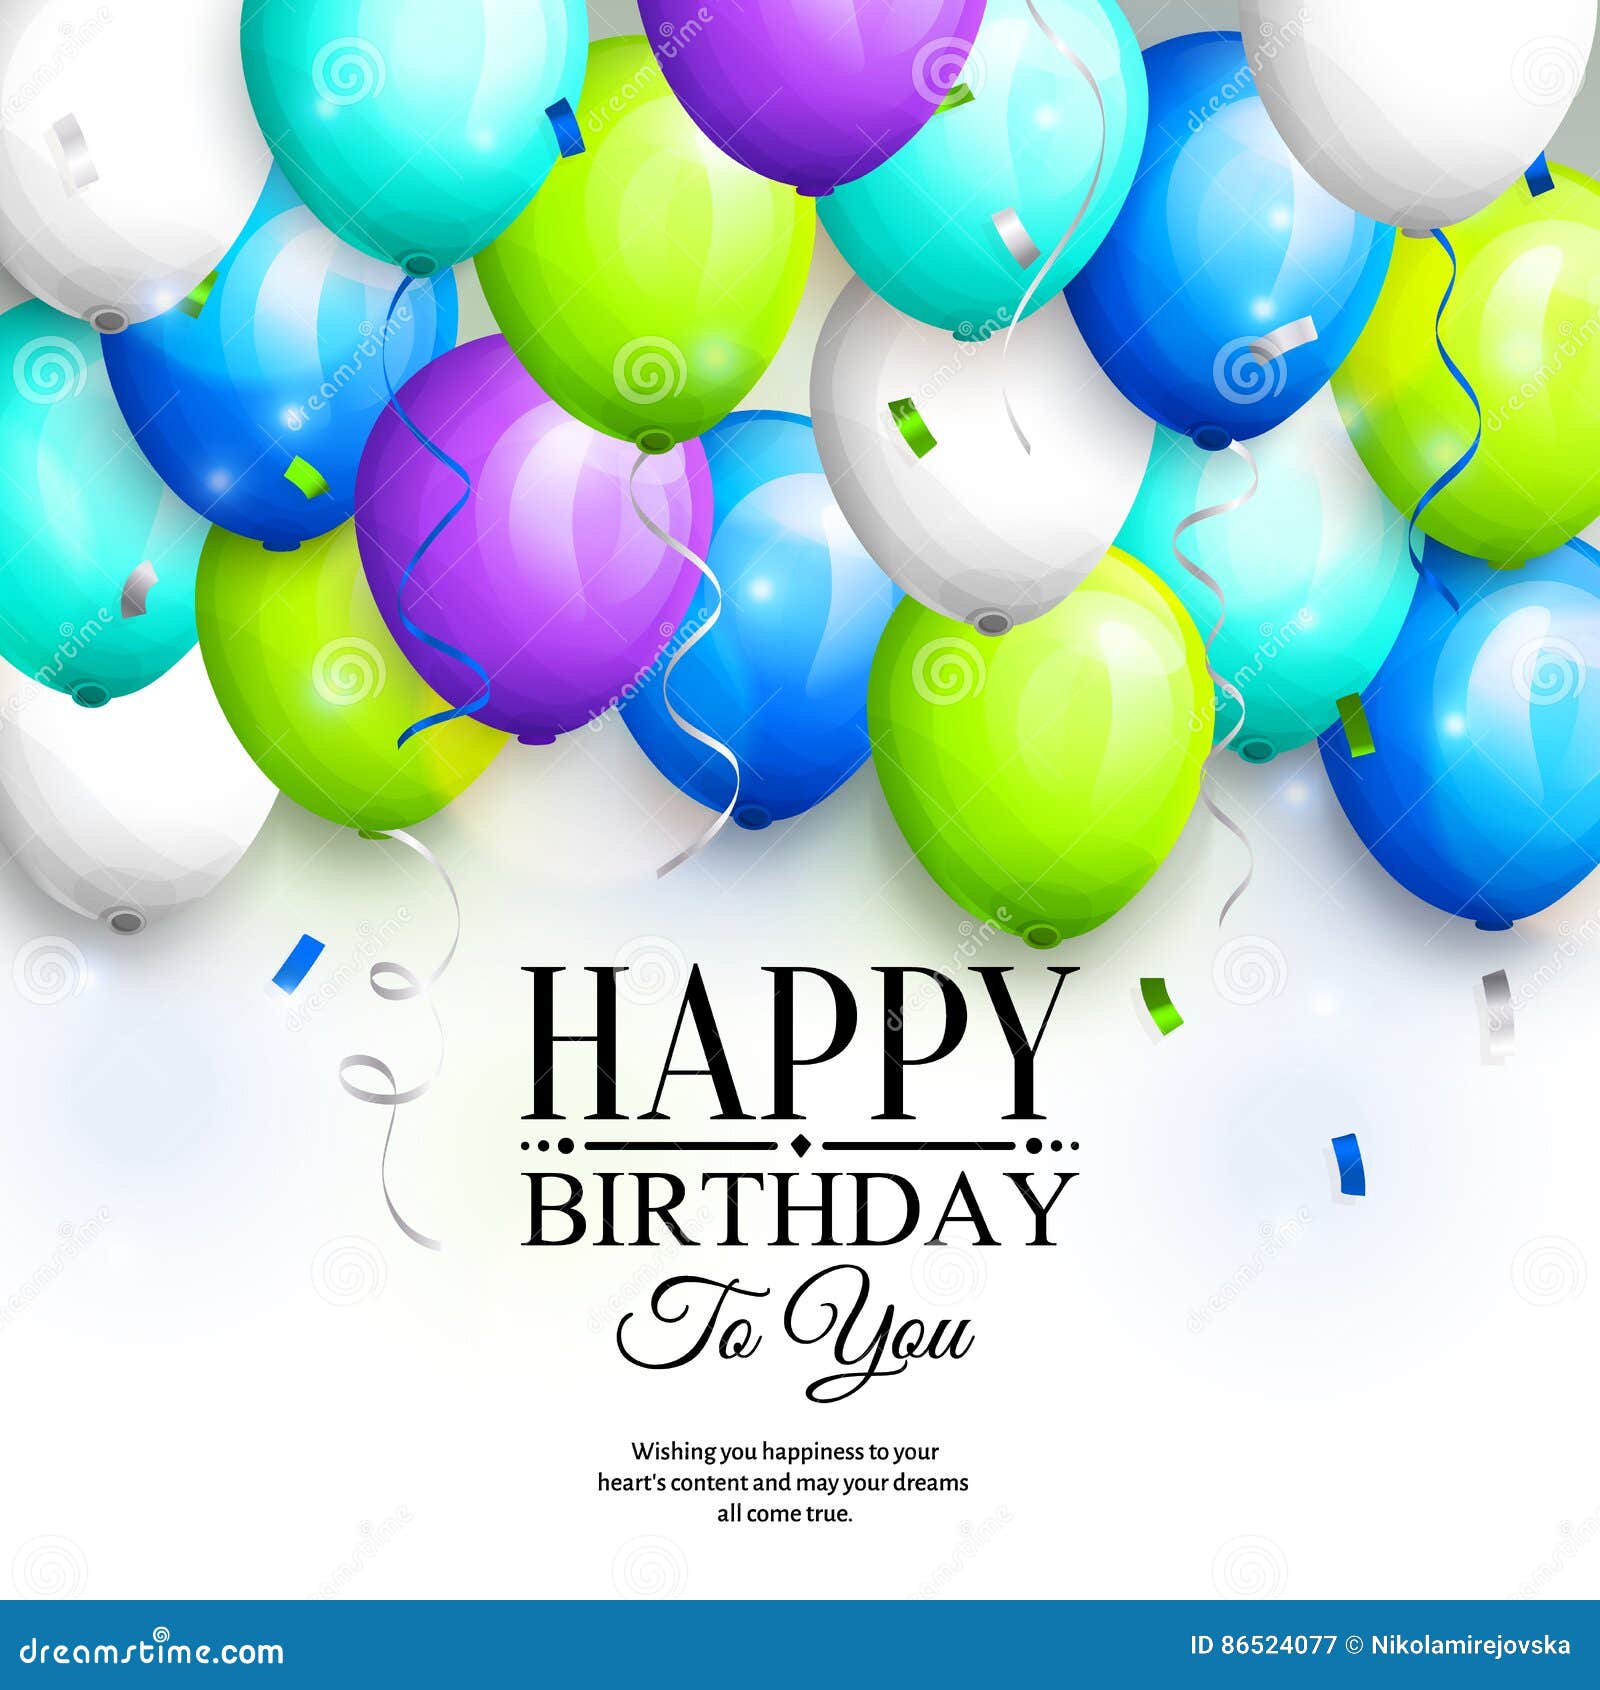 Happy Birthday Greeting Card. Party Colorful Balloons, Streamers ...